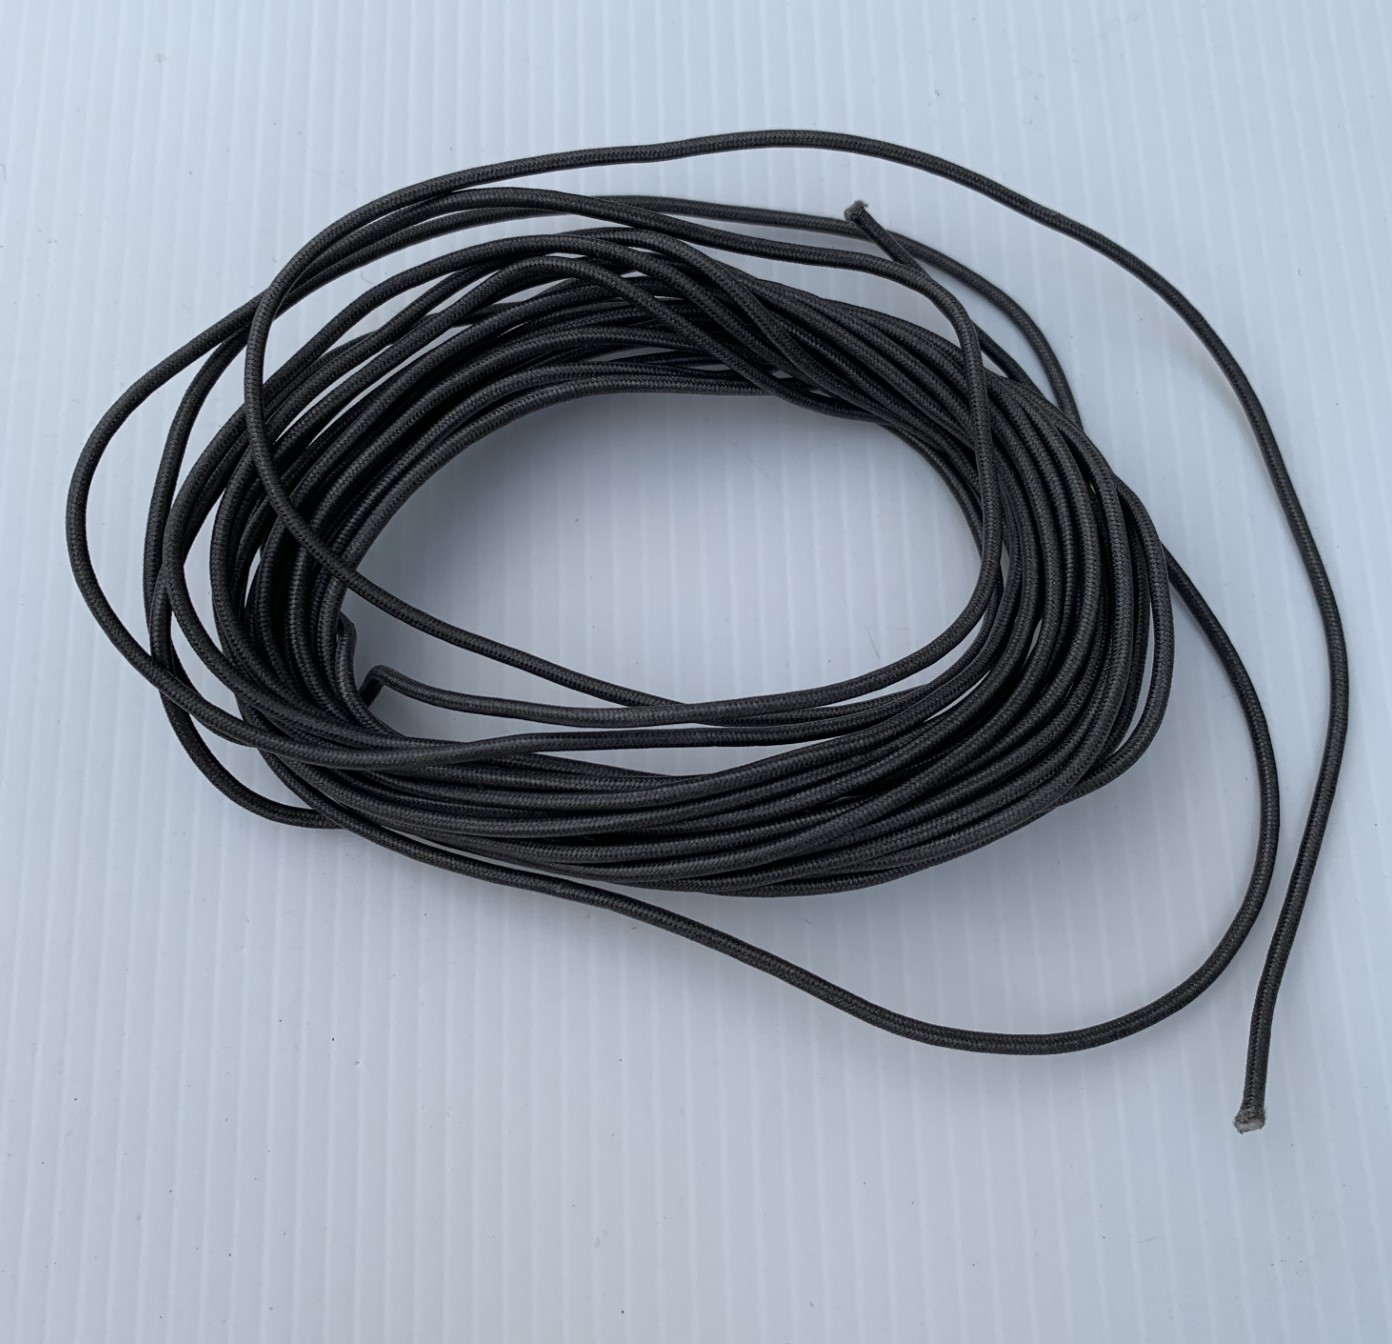 Loosely coiled length 3.3 metre of 1/16th diameter spectra rudder cord